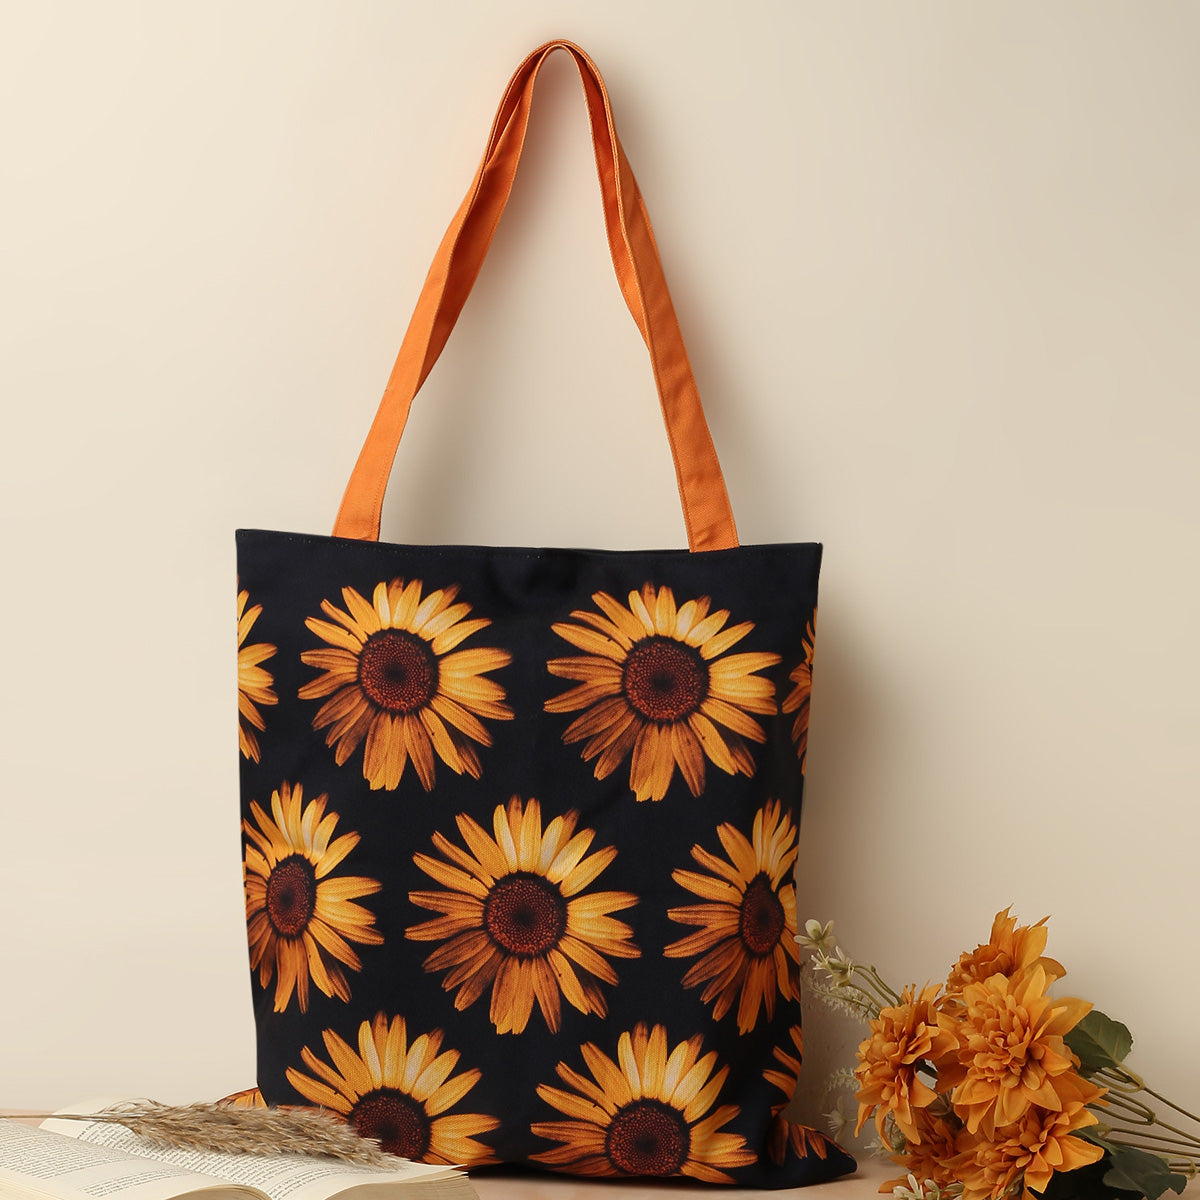 A stylish tote bag in black color and orange sunflower design on it with orange color handles adorned with beautiful bunch of flowers beside on a table and beige background